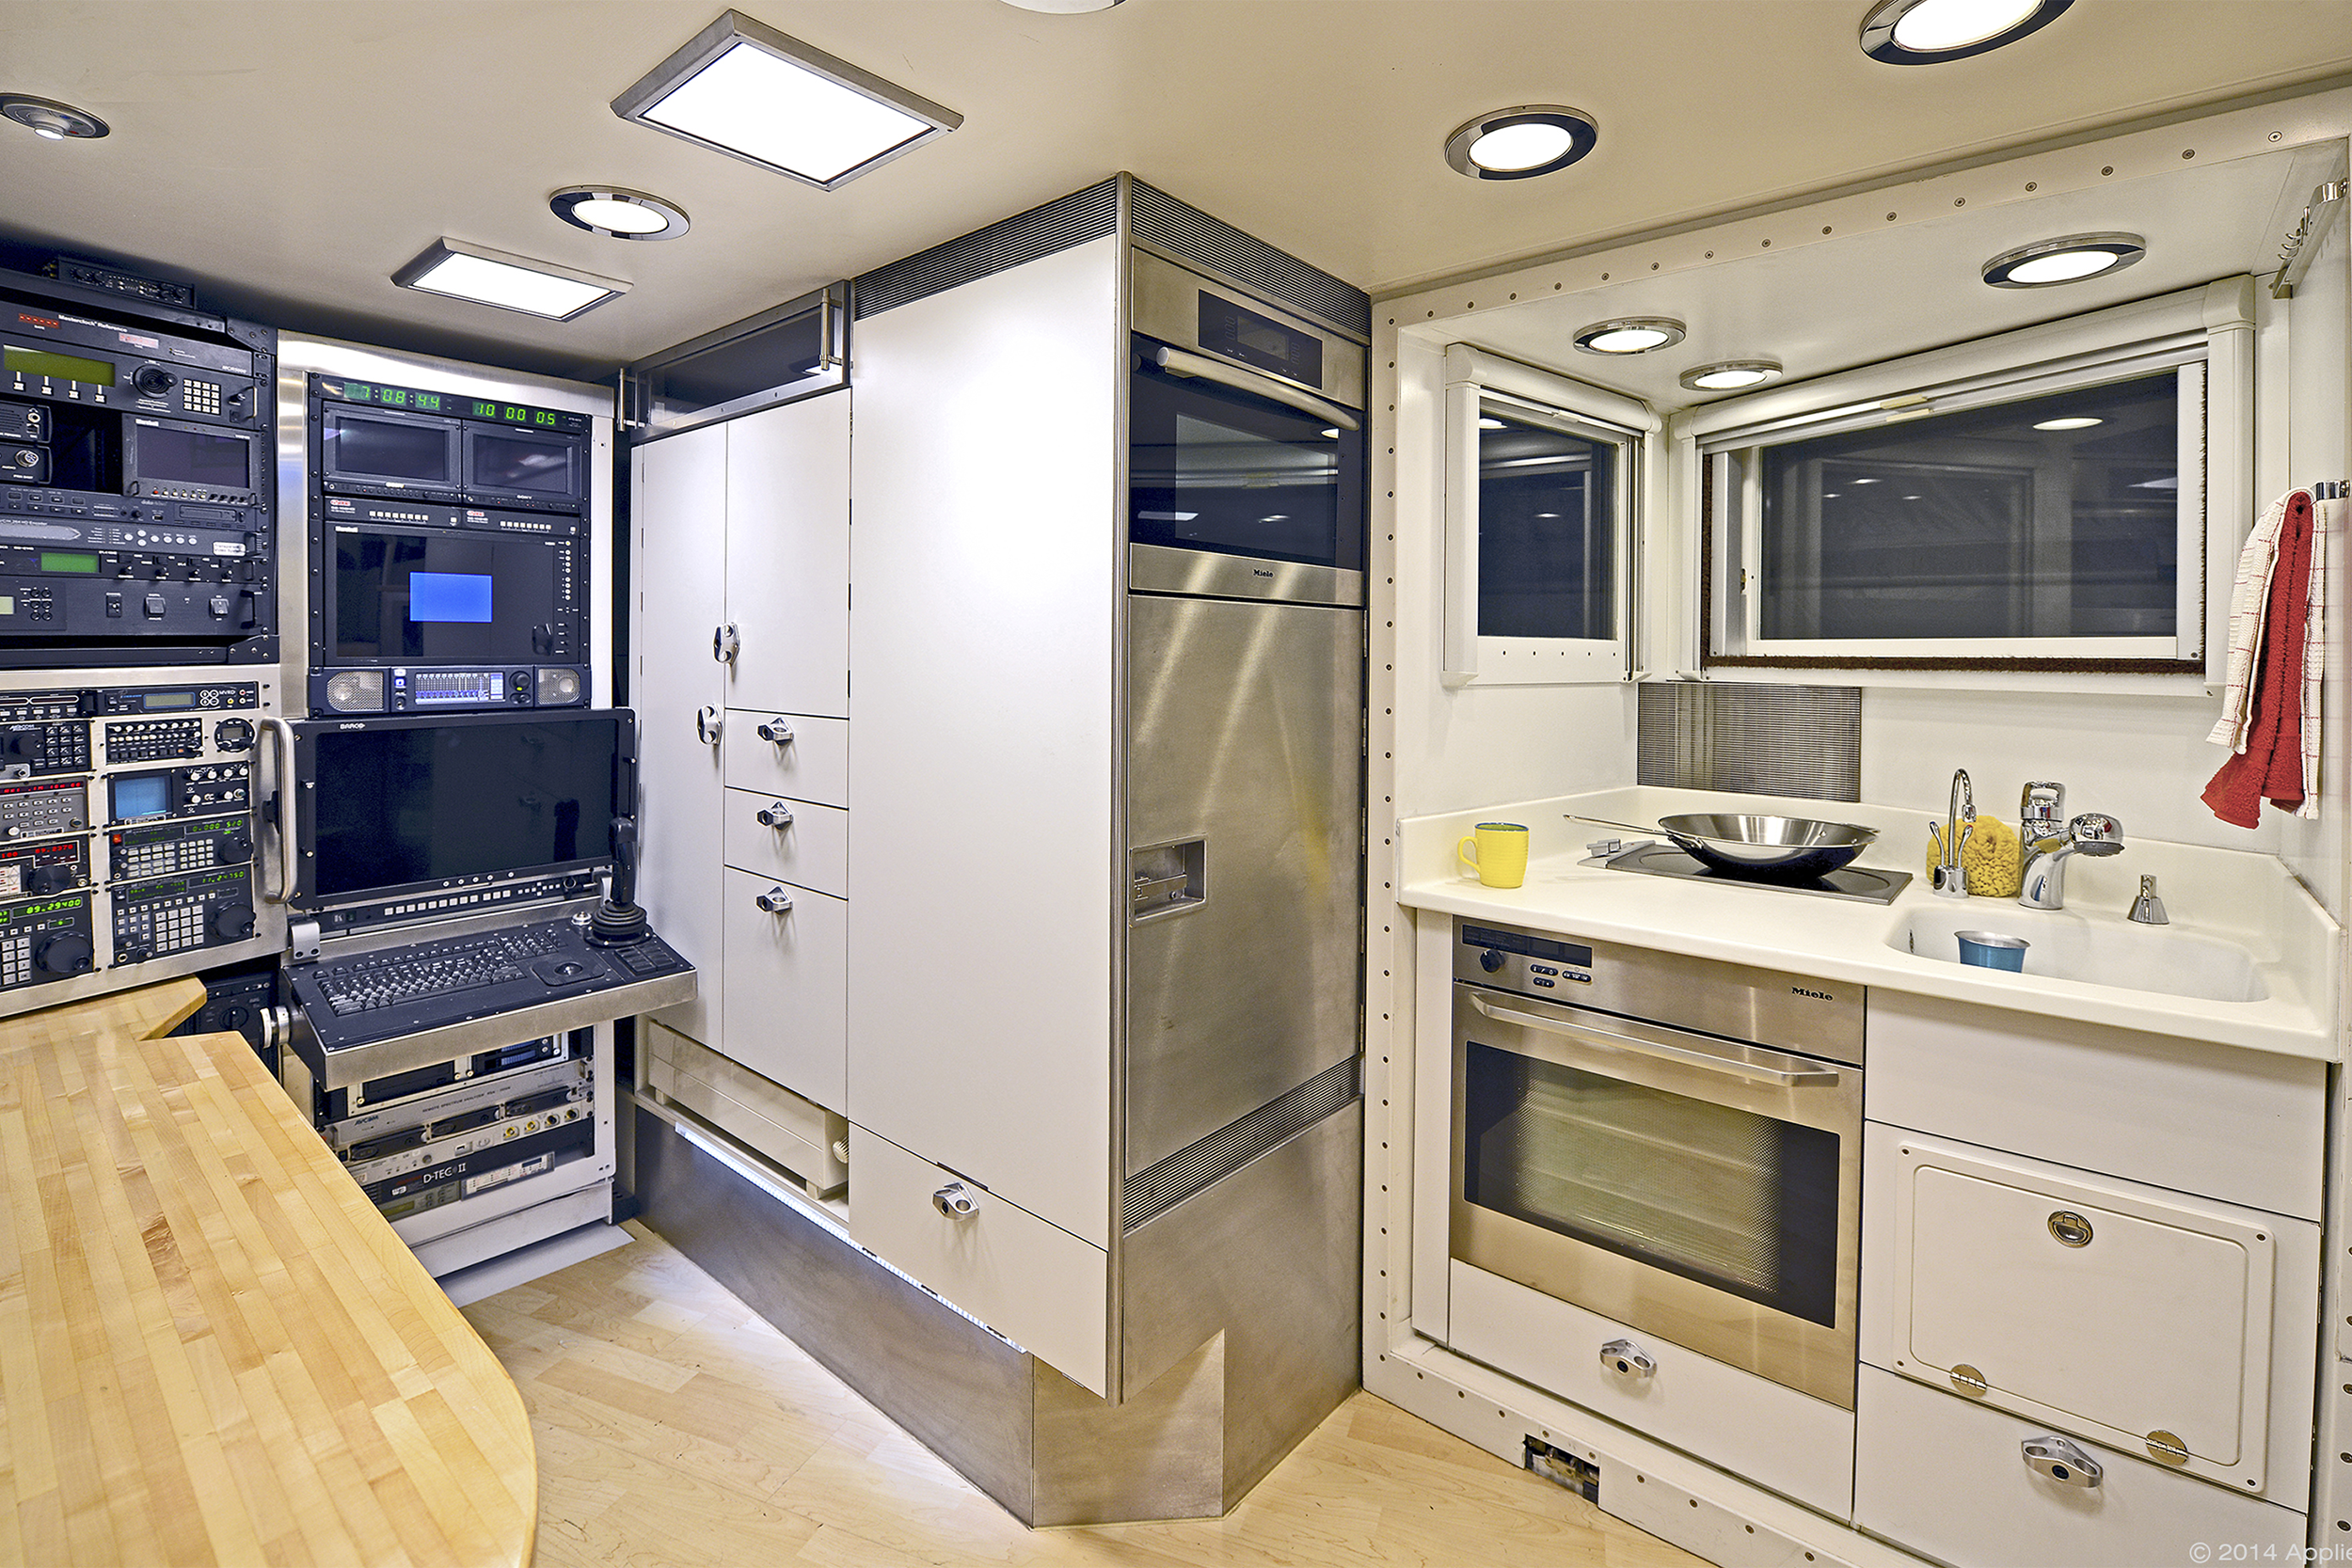 Designed to keep a crew of three on the road for three weeks, the KiraVan trailer contains a high-tech office with satellite connectivity, a professional video-editing suite, and a networked computer system. During downtime, travelers can clean up in the bathroom (which features a dramatic skylight roof), relax in one of the three sleeping areas, or take the included KiraBike motorcycle for a spin.